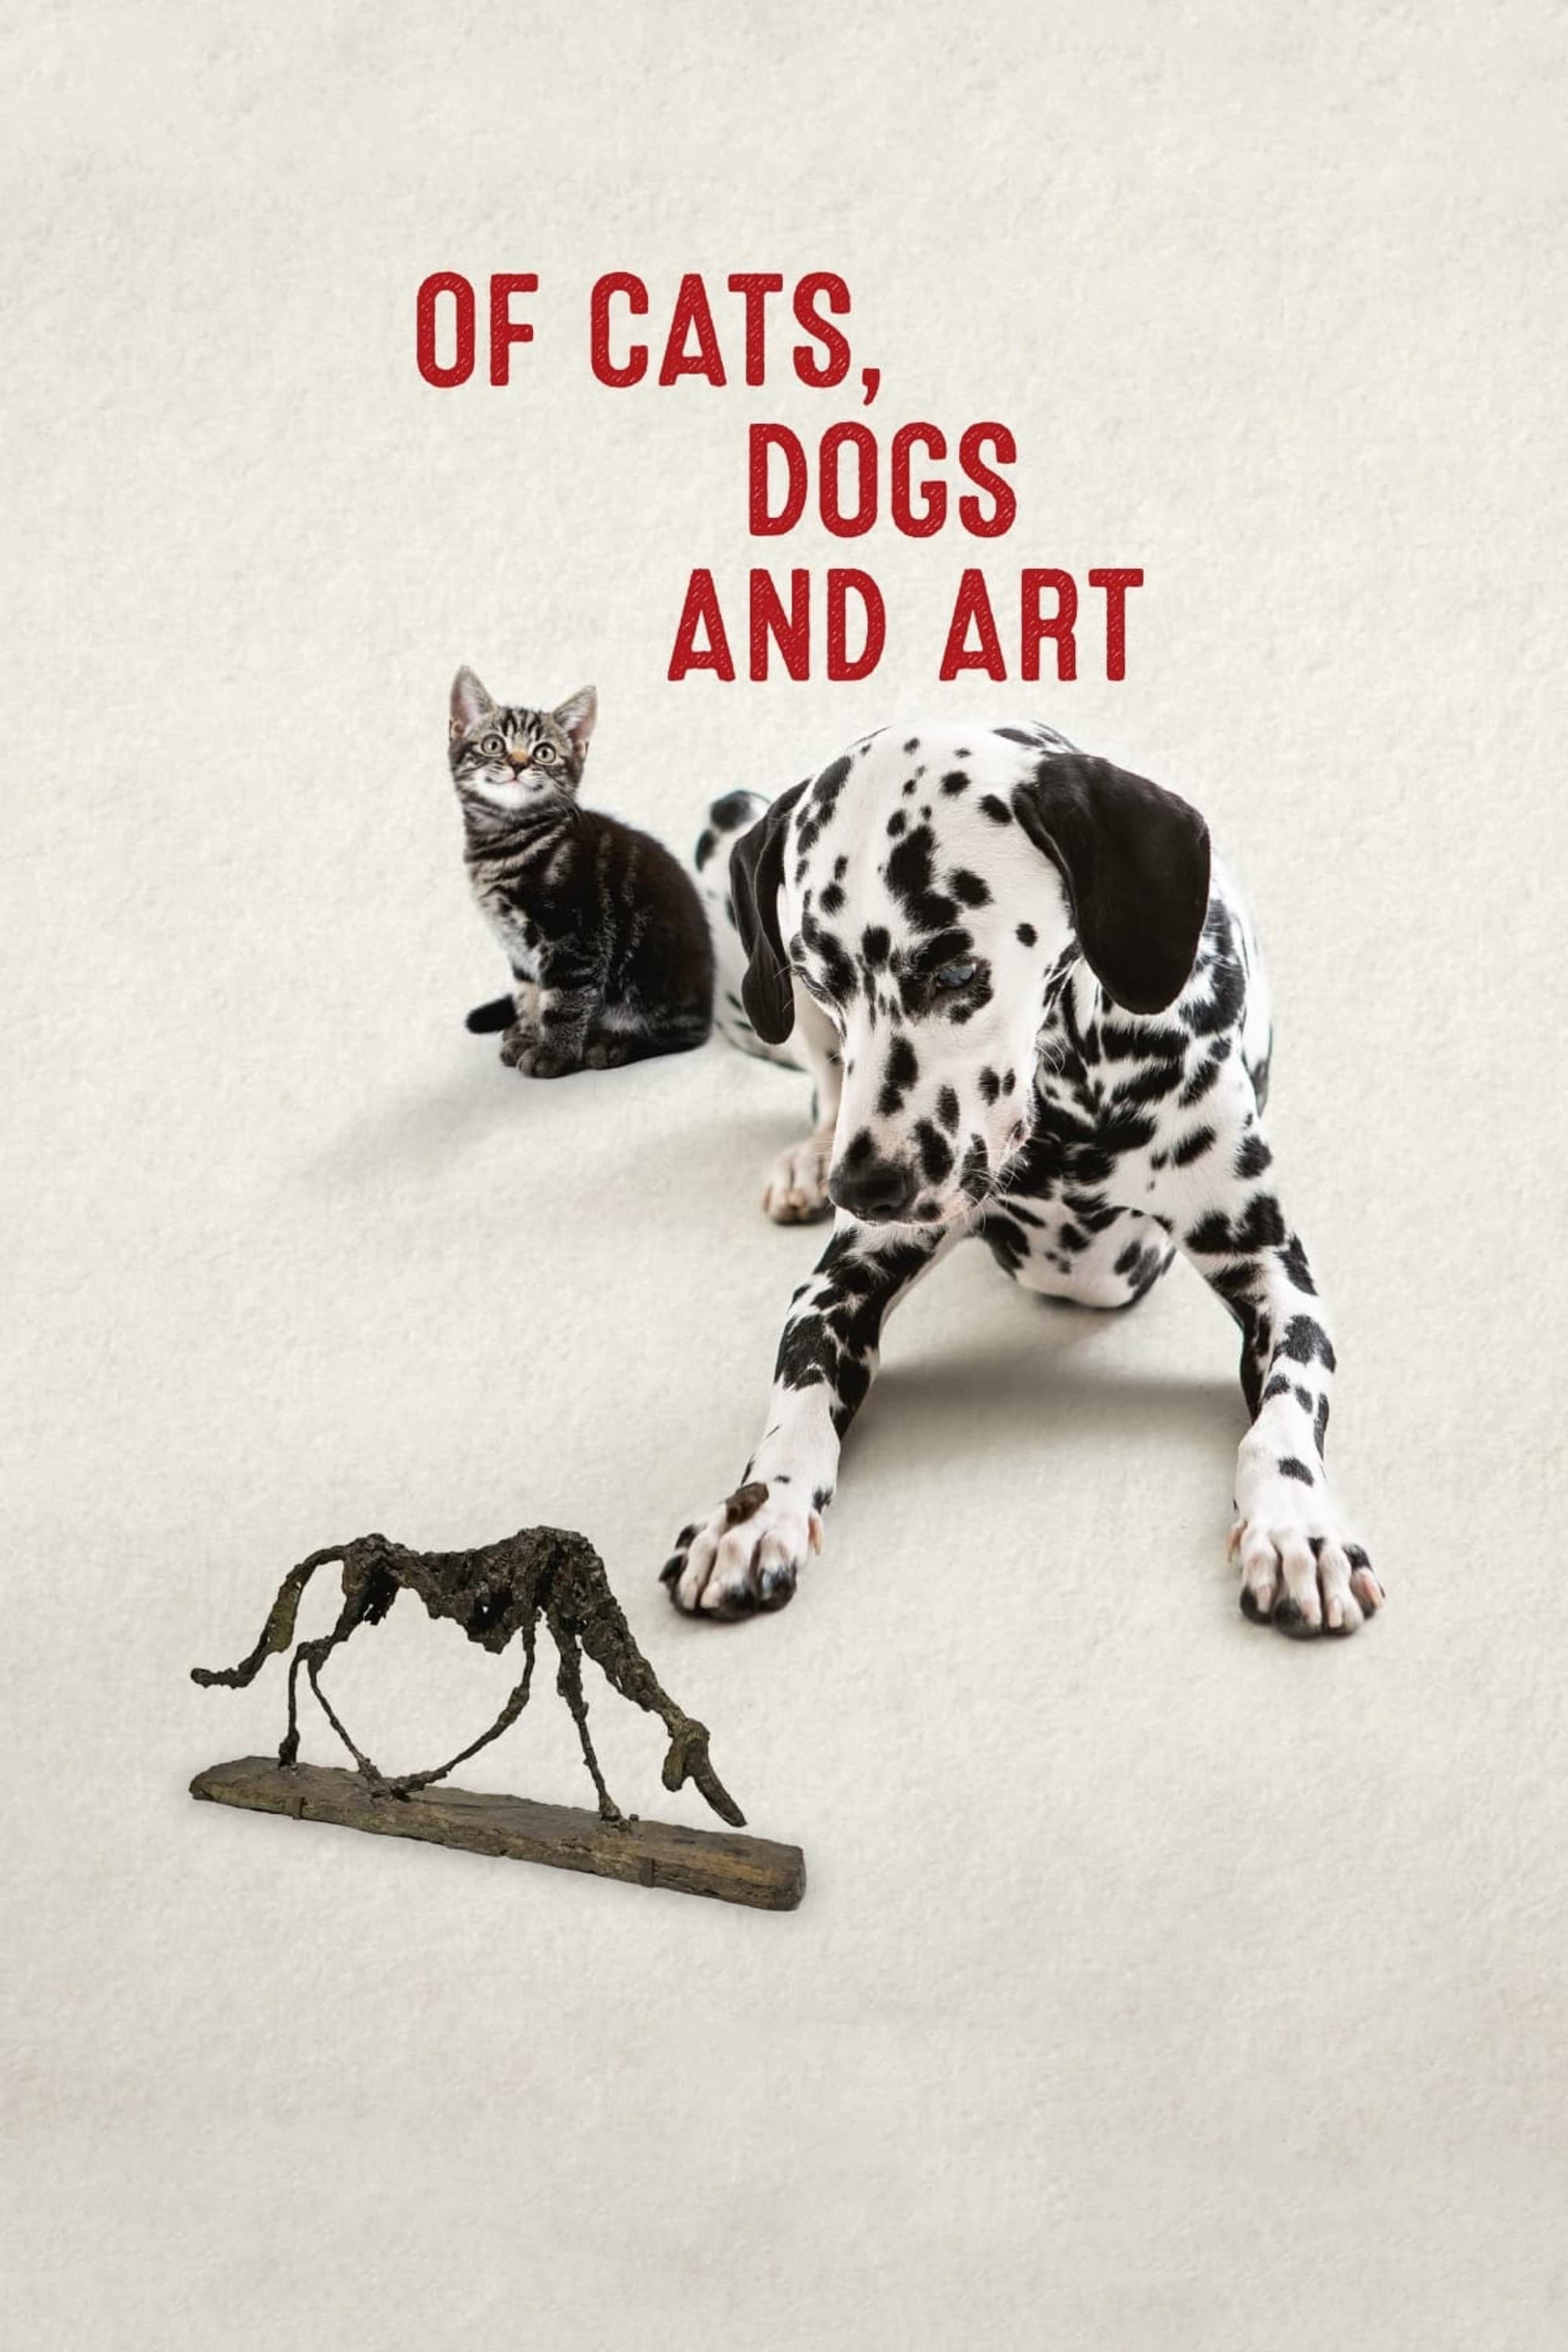 Of Cats, Dogs and Art